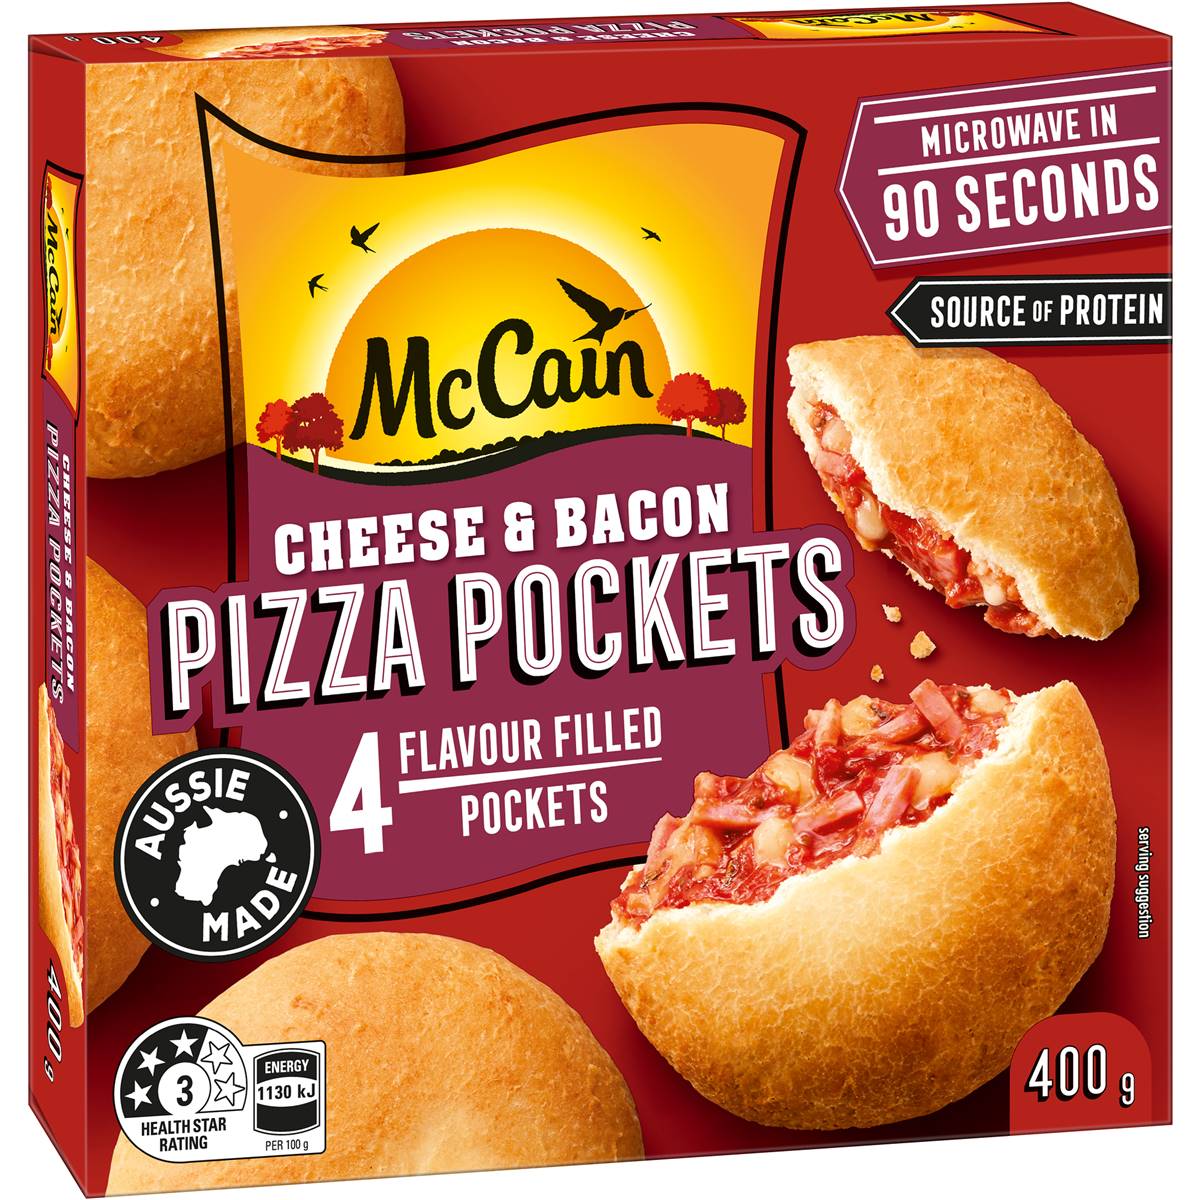 Calories in Mccain Pizza Pocket Snacks Cheese & Bacon